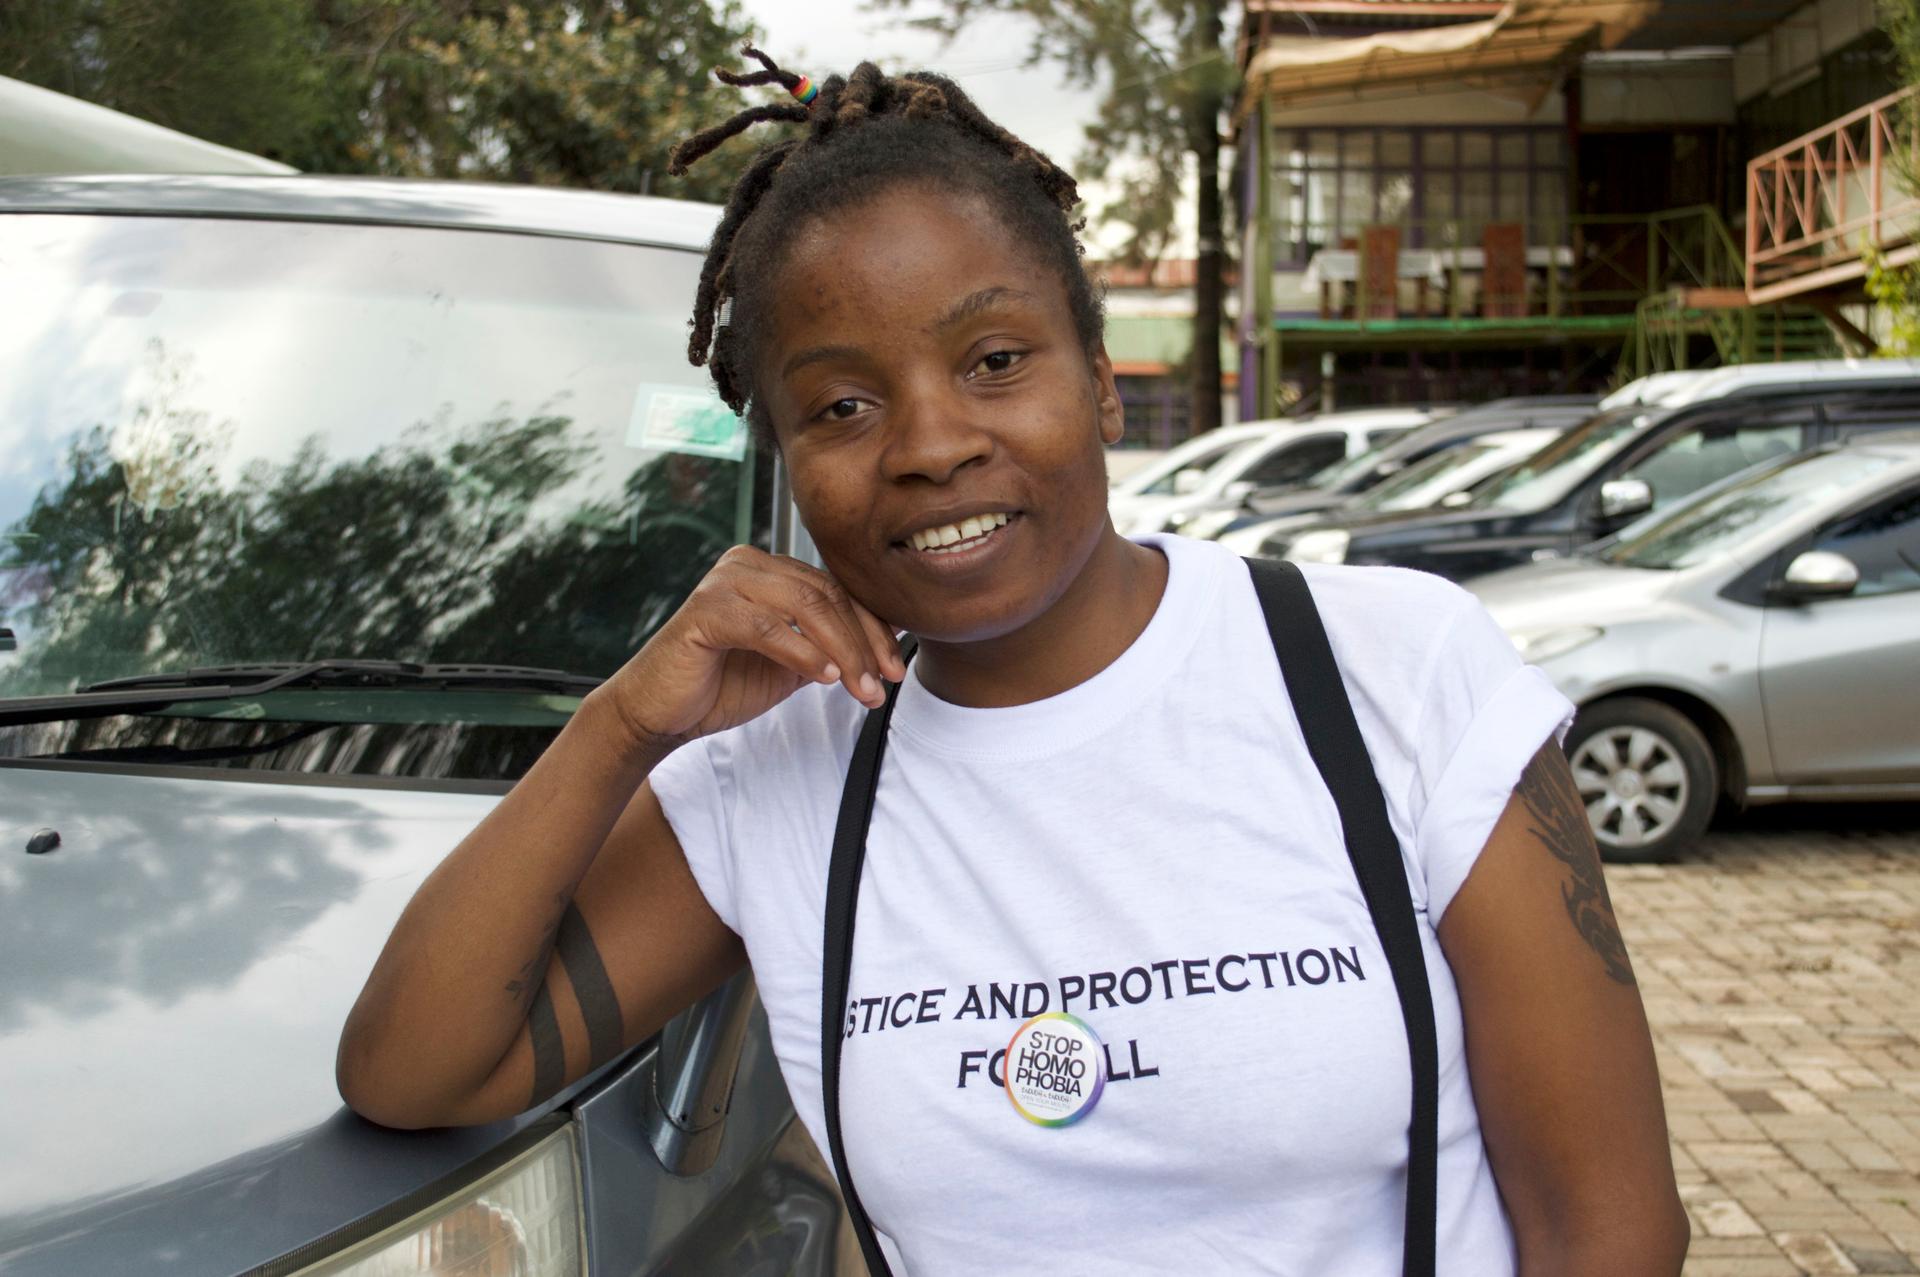 A woman poses for picture wearing white t-shirt and hand on her face.